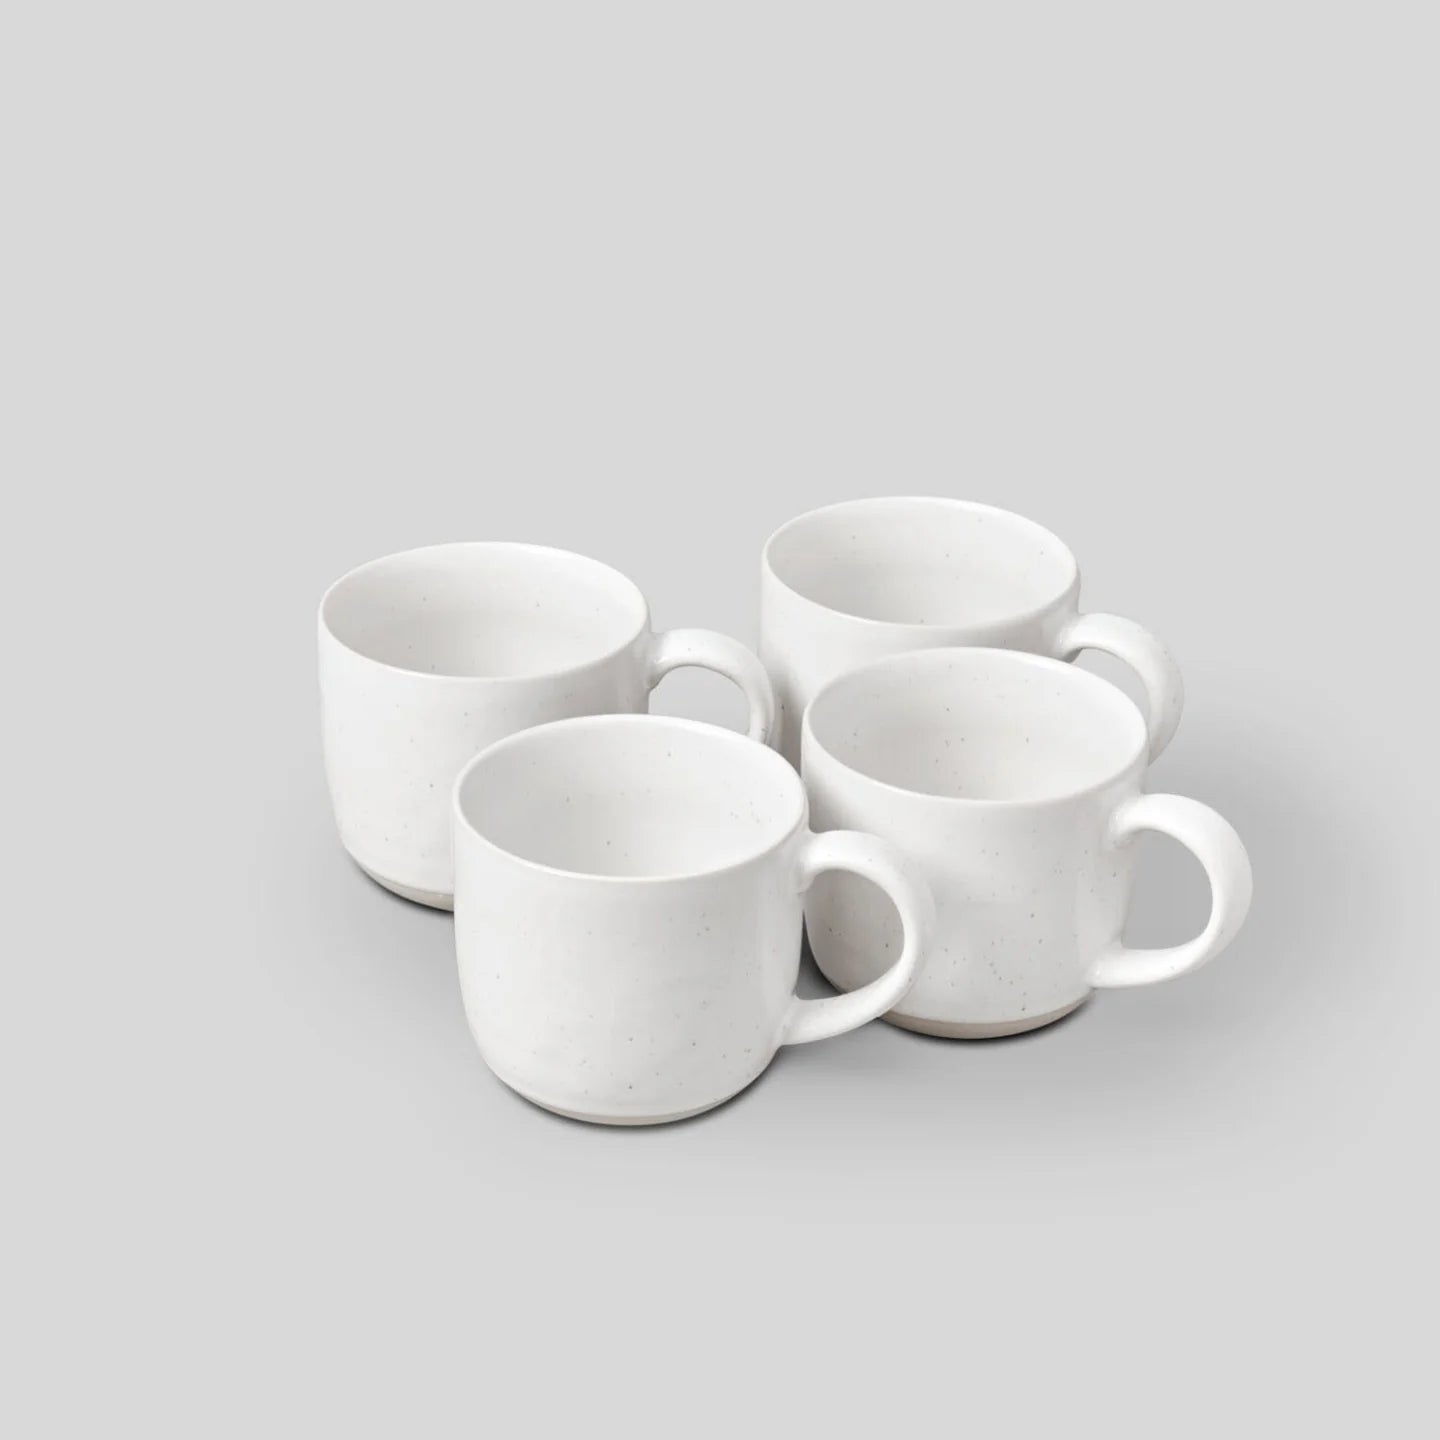 The Mugs (4) - Speckled White